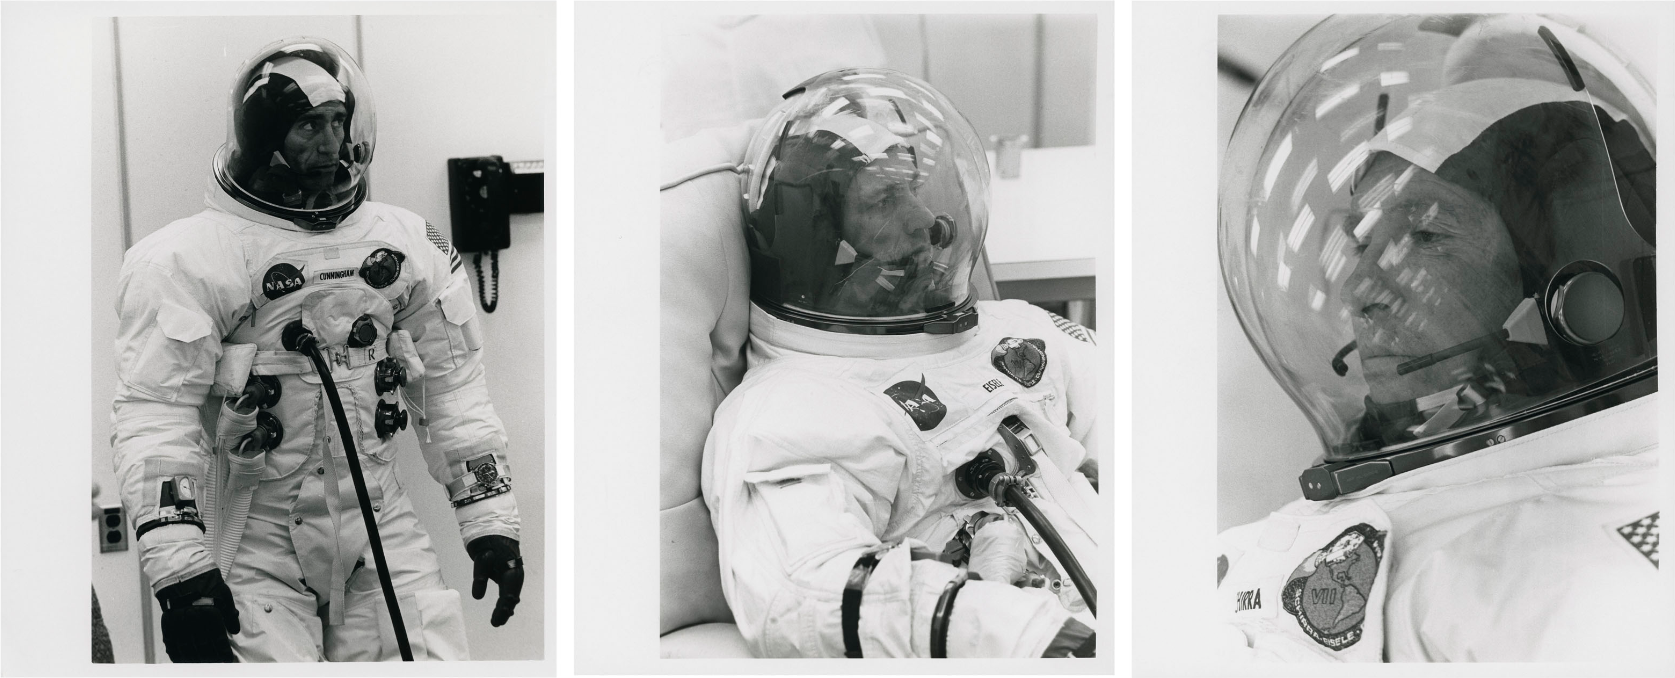 Portraits of the astronauts in spacesuit